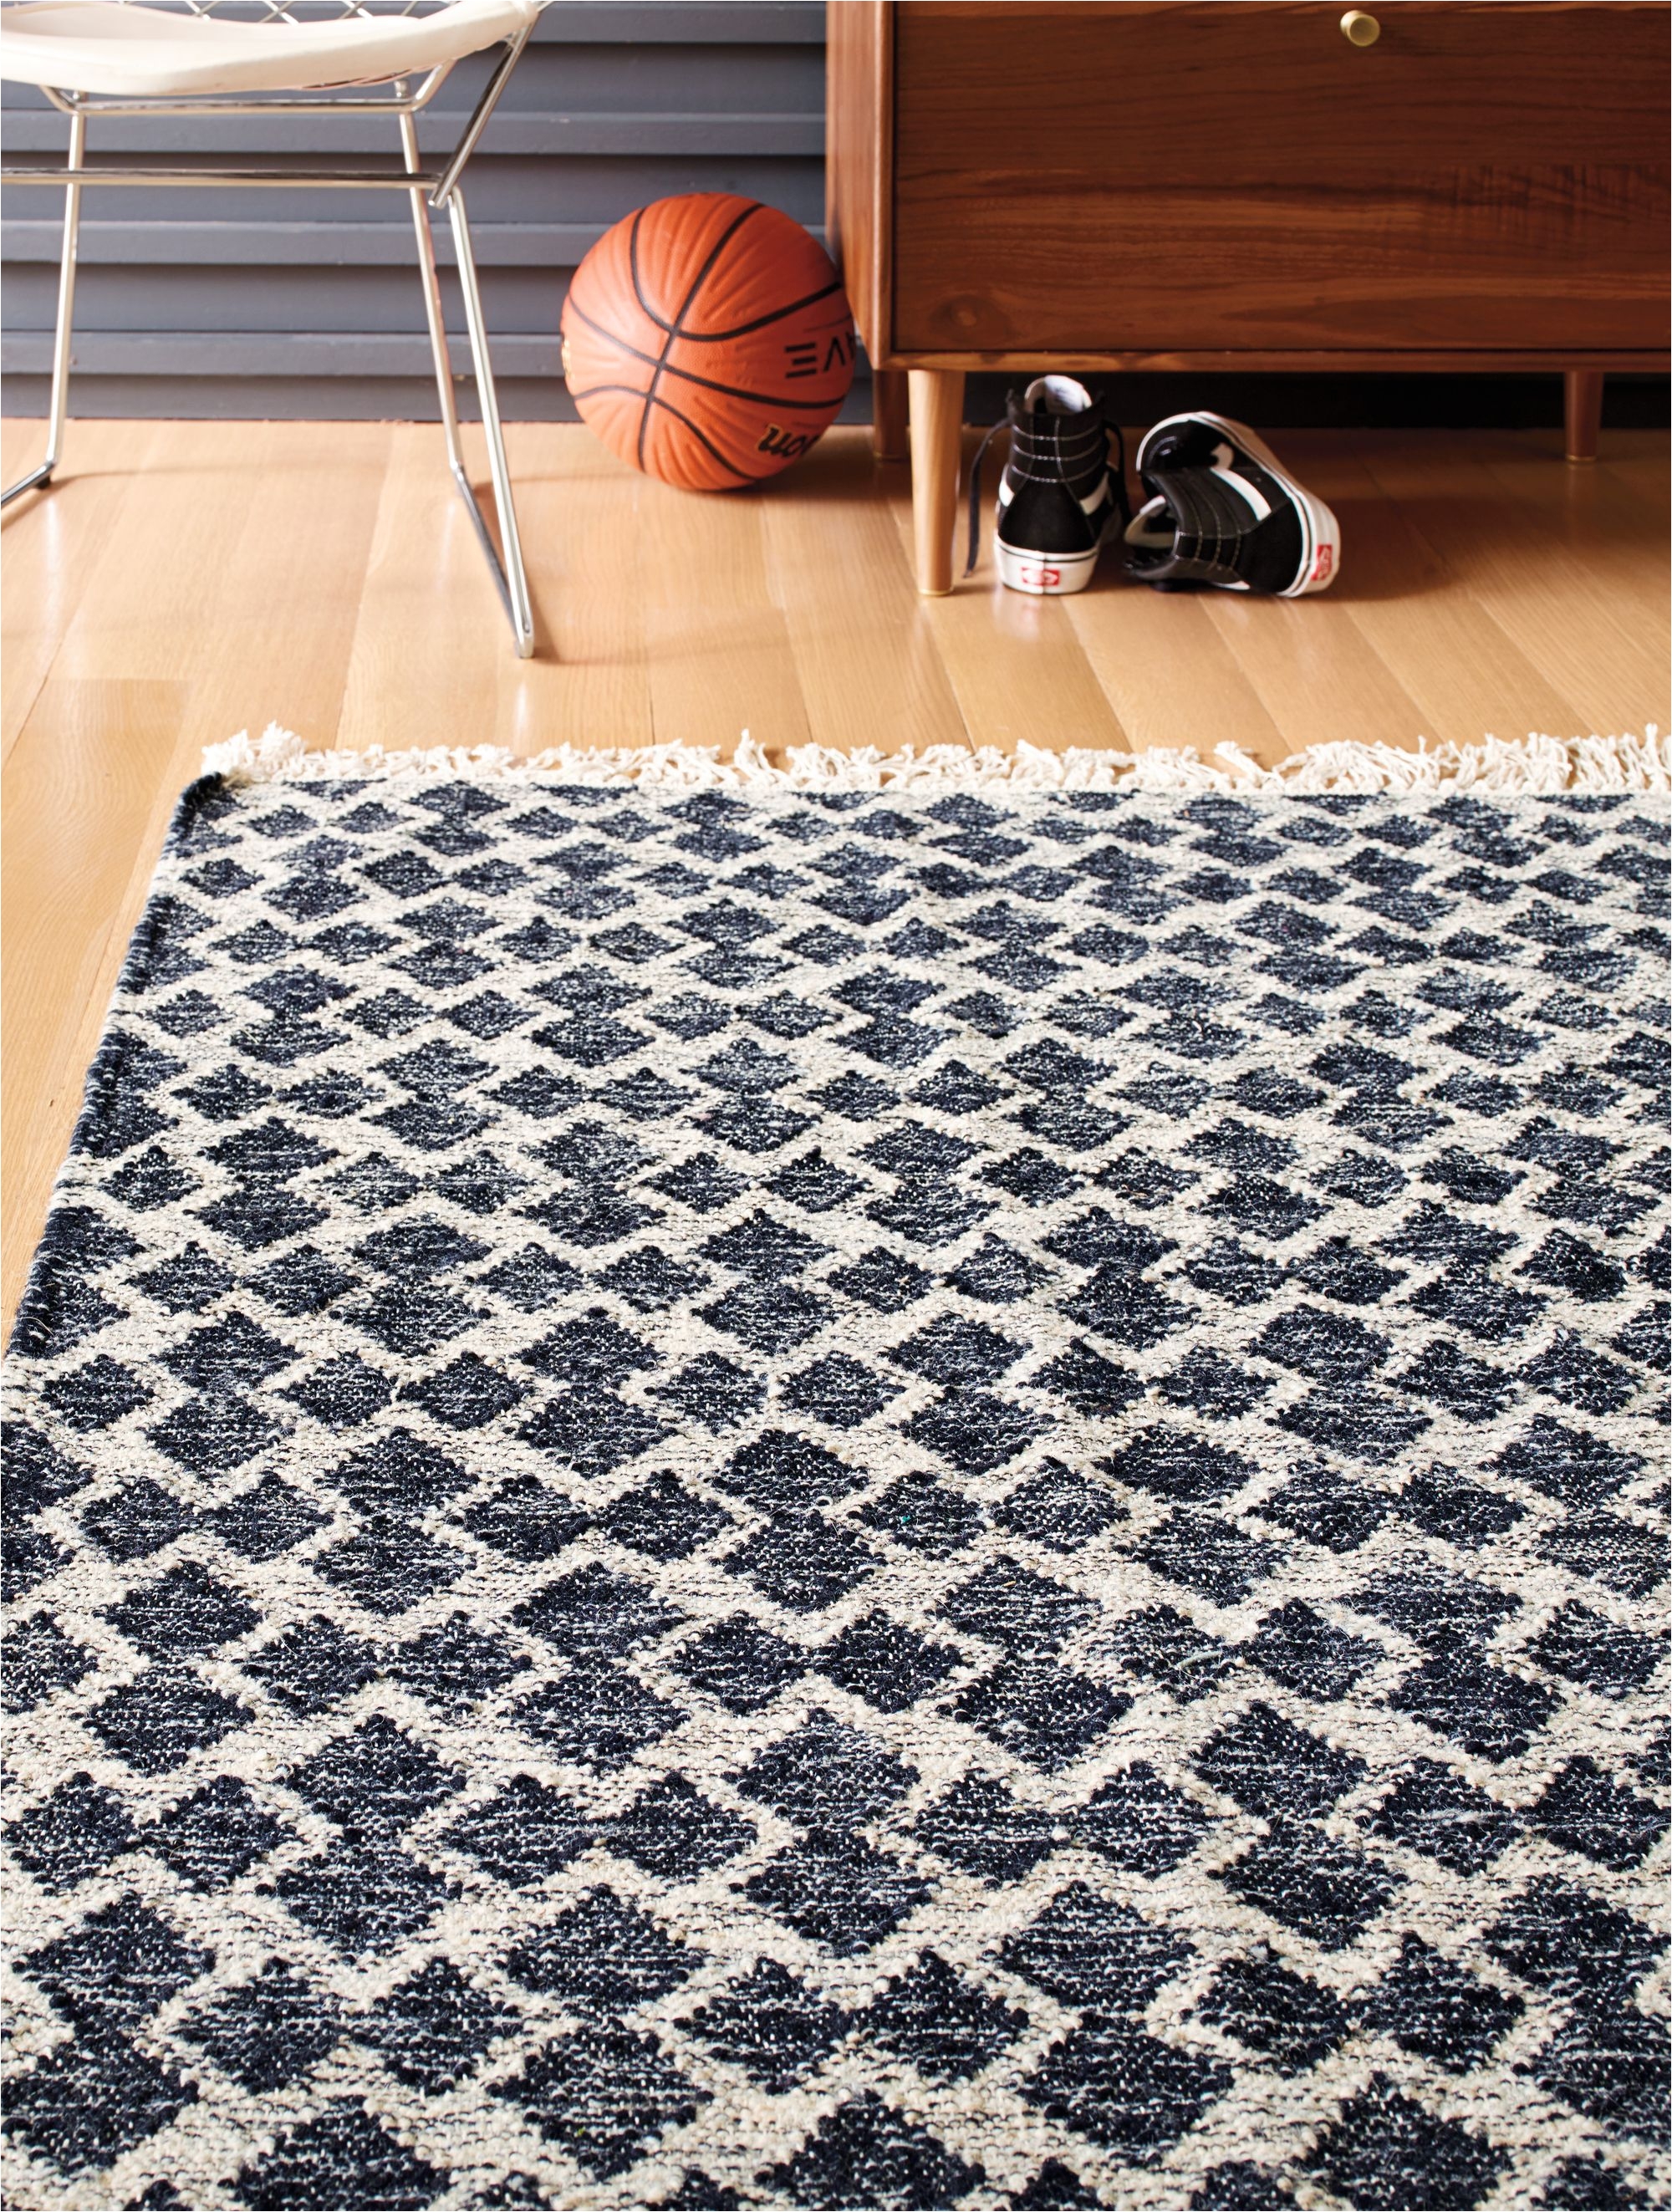 our bow tie kilim rug captivates with its simple yet bold pattern its rich